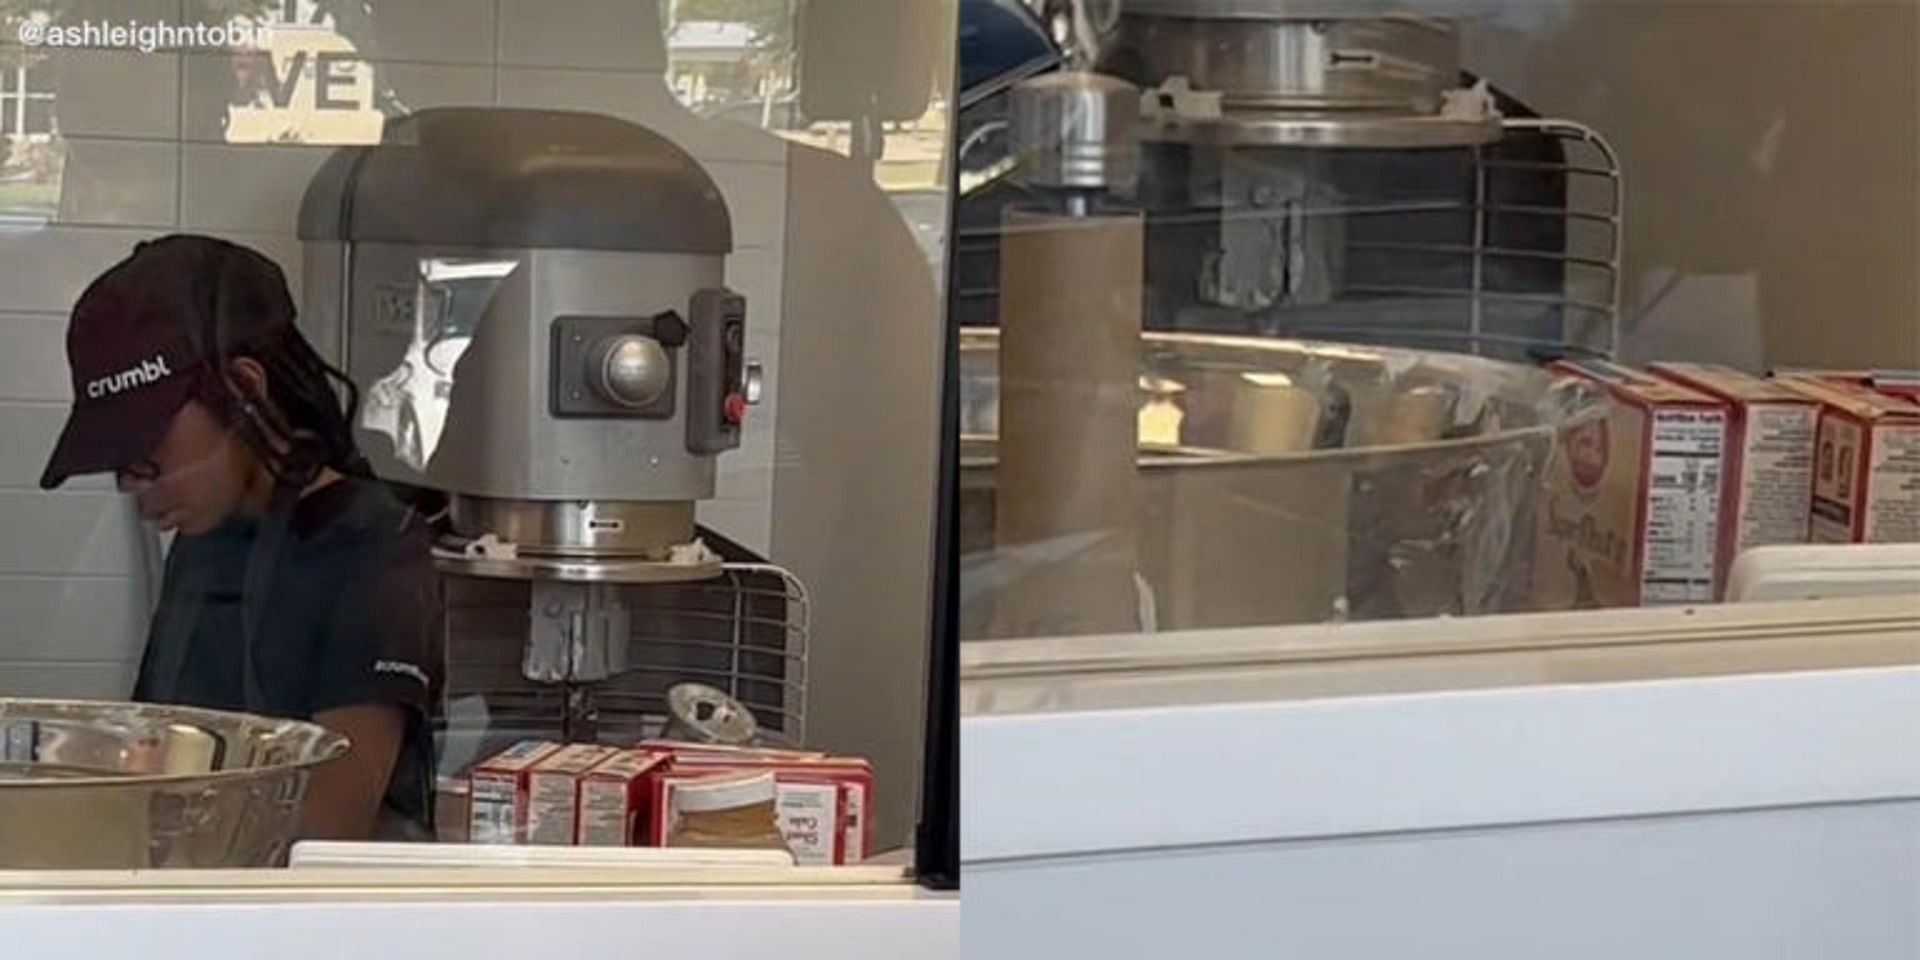 Does Crumbl Cookie use a pre mix to make their cookies? Controversy explored as a customer spots Betty Crocker boxes on a work station. (Image via TikTok)